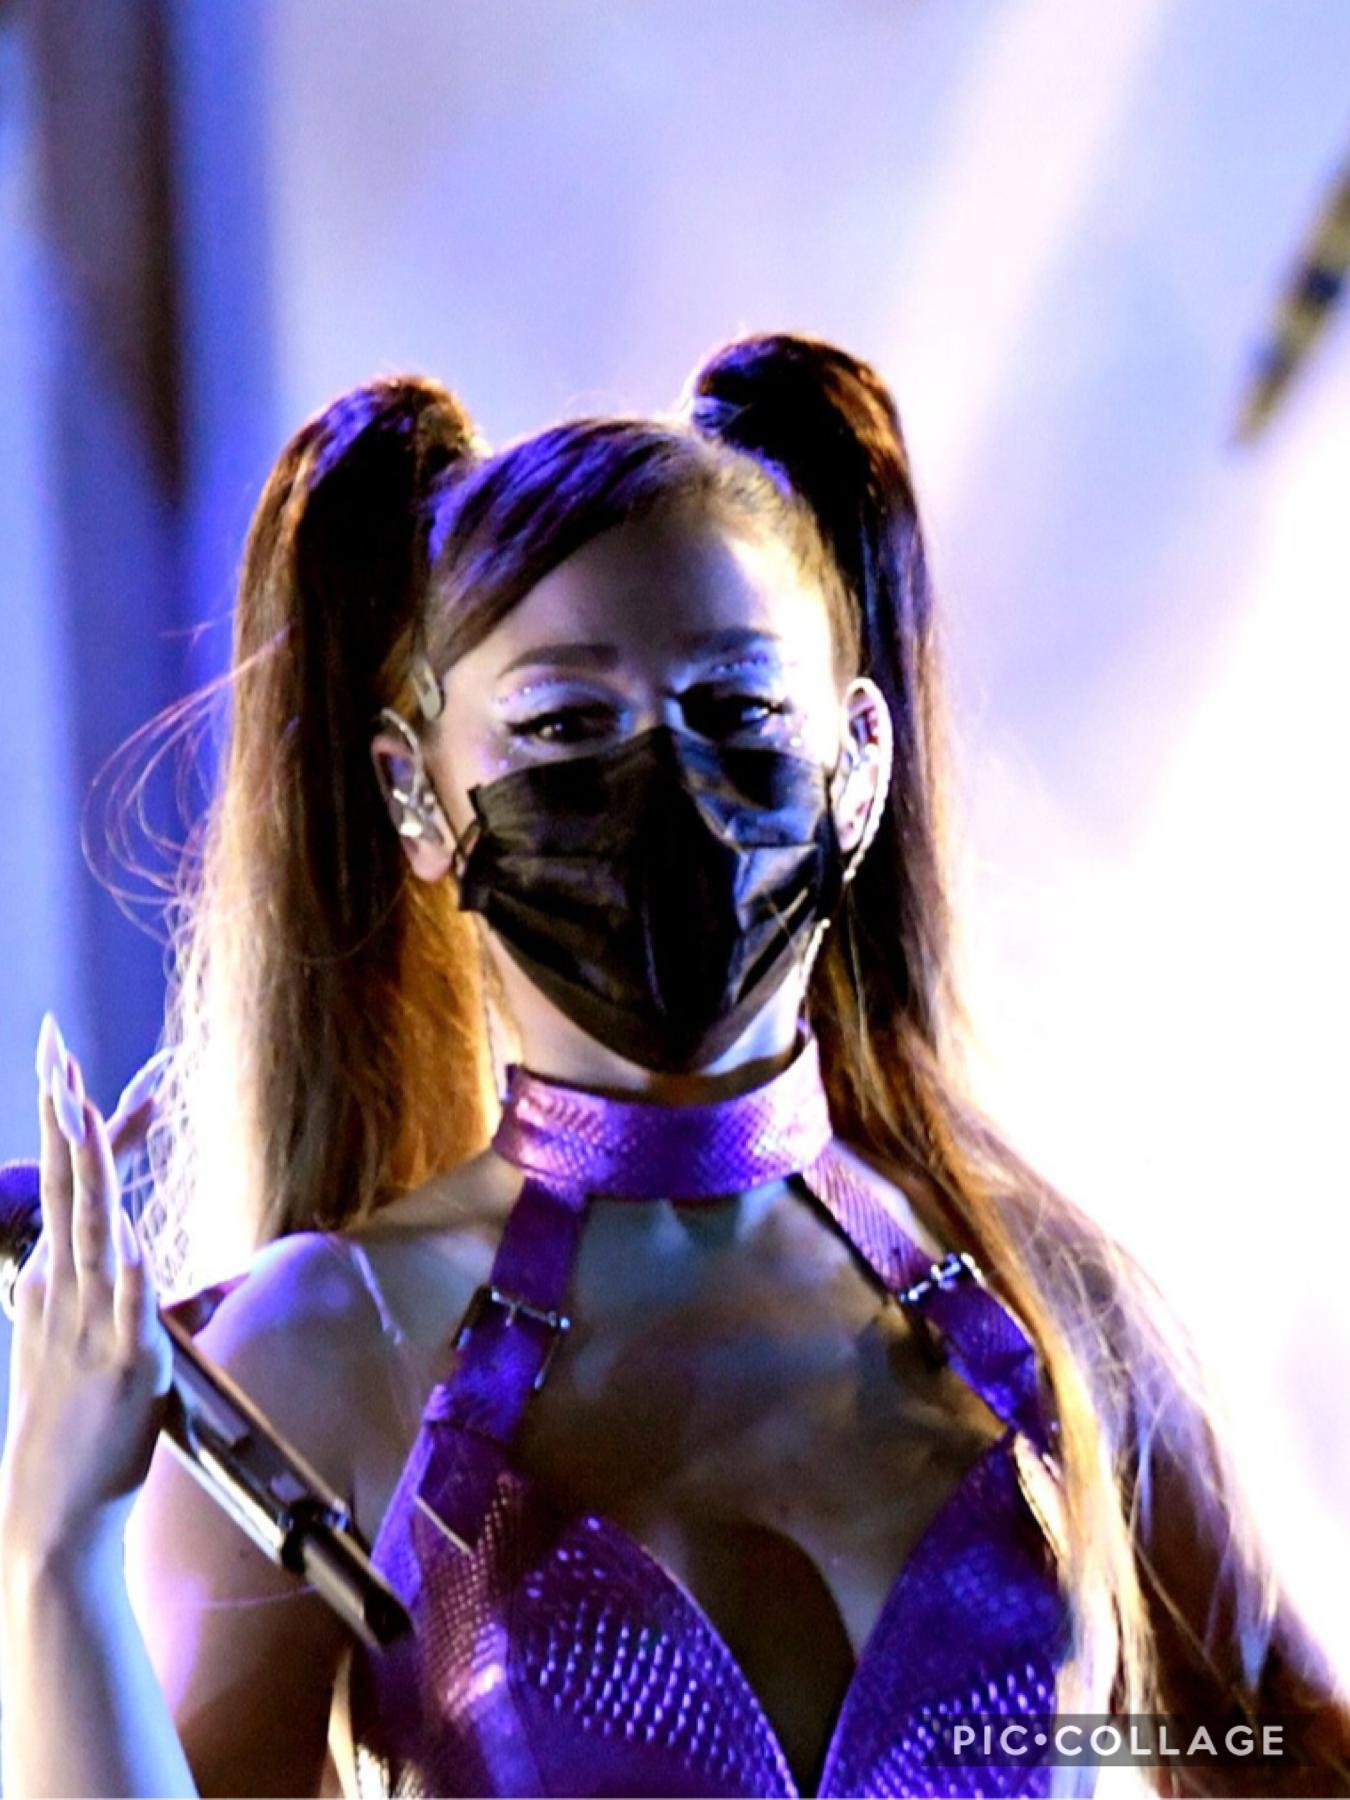 Ariana grande look cute with a mask [GIRL POWER]